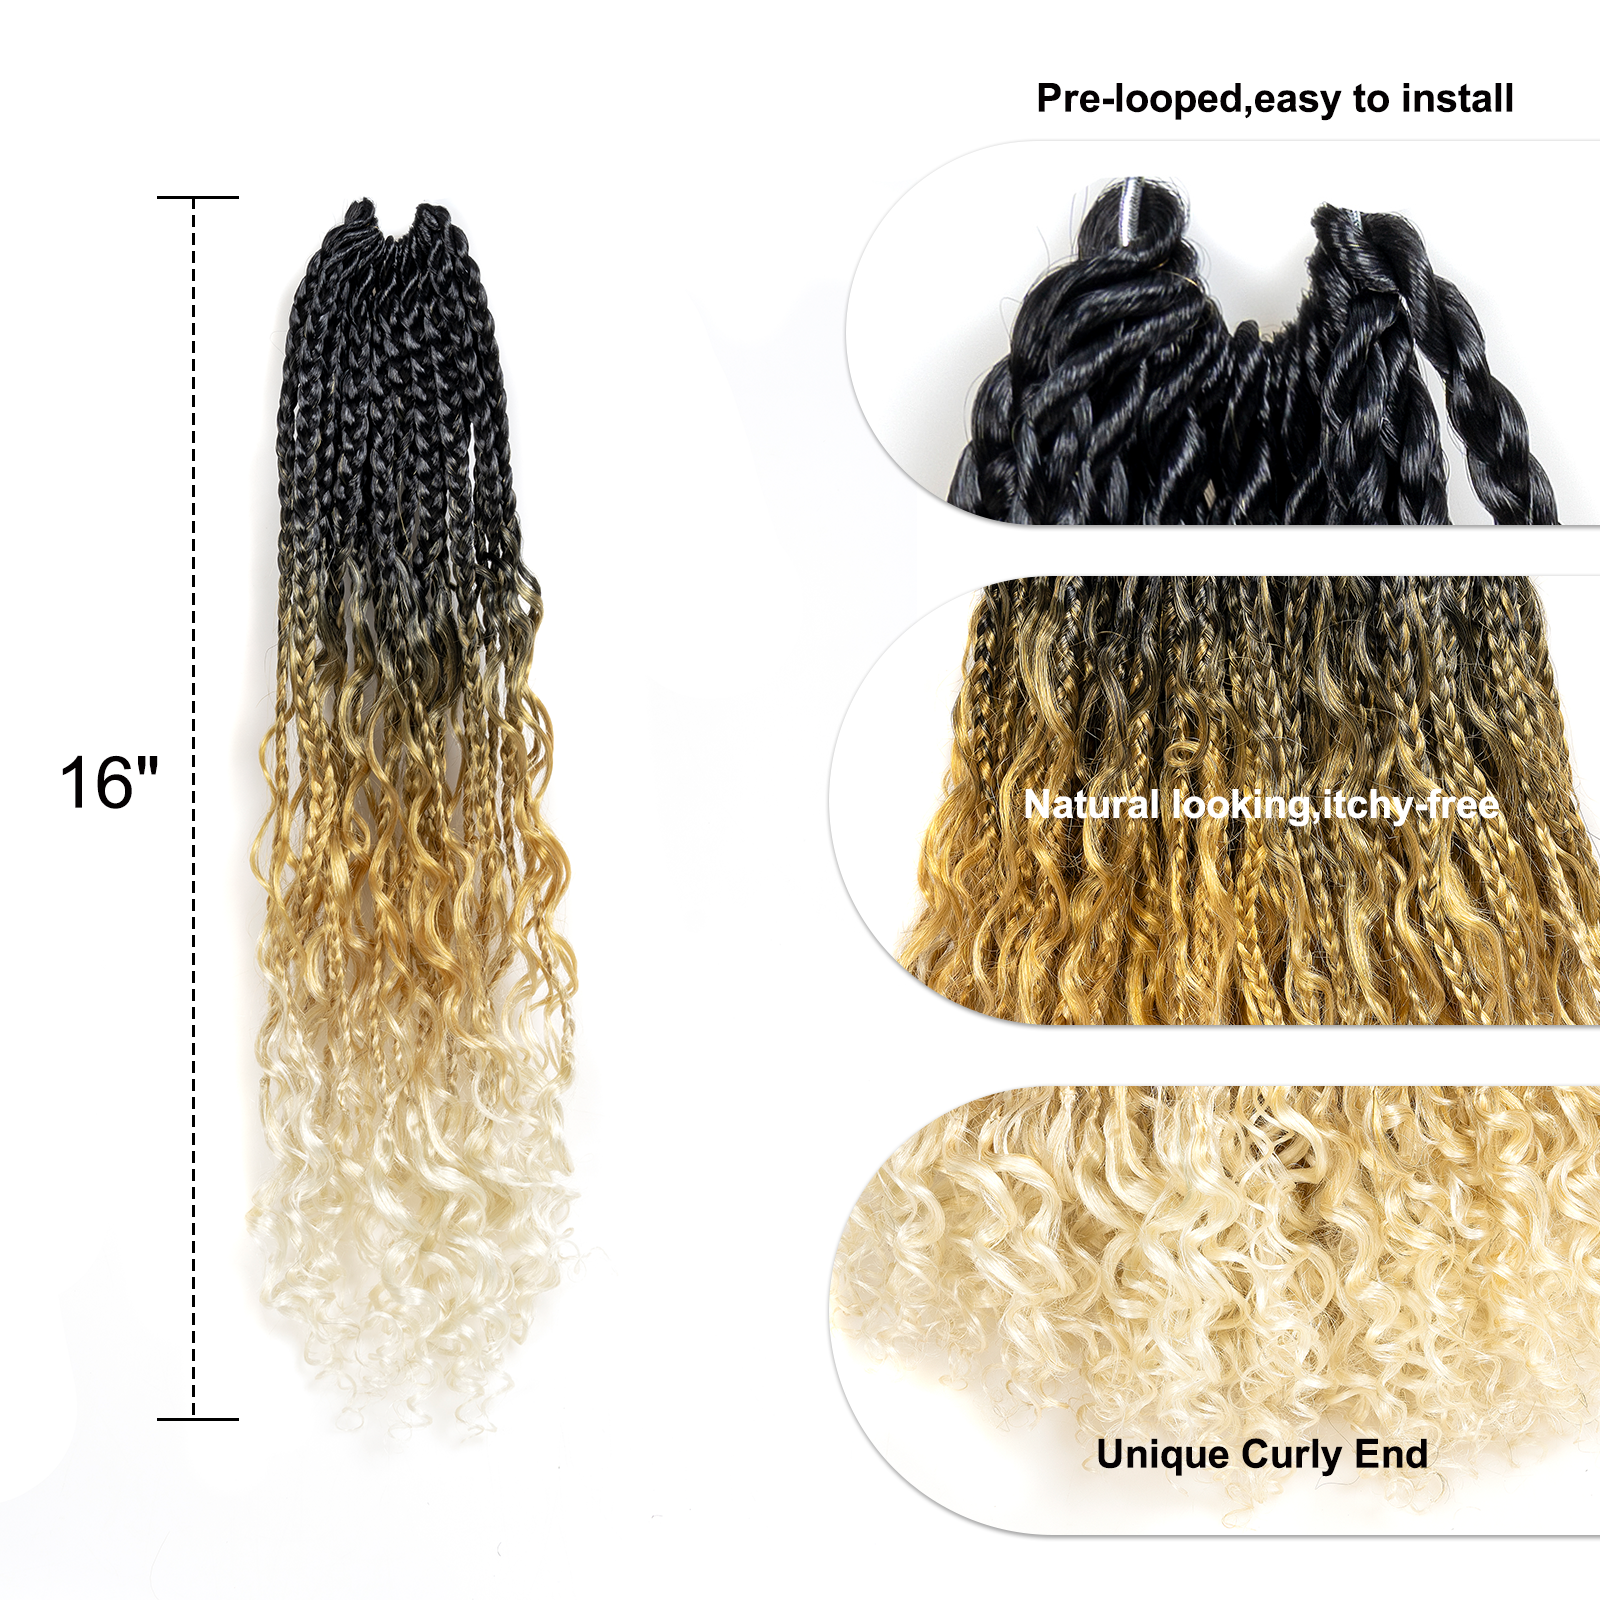 𝕮𝖆𝖓𝖈𝖊𝖗 | Bohemian Box Braid with Curl  12-20 Inch | Pre-Twisted Pre-Looped Crochet Synthetic Braiding Hair